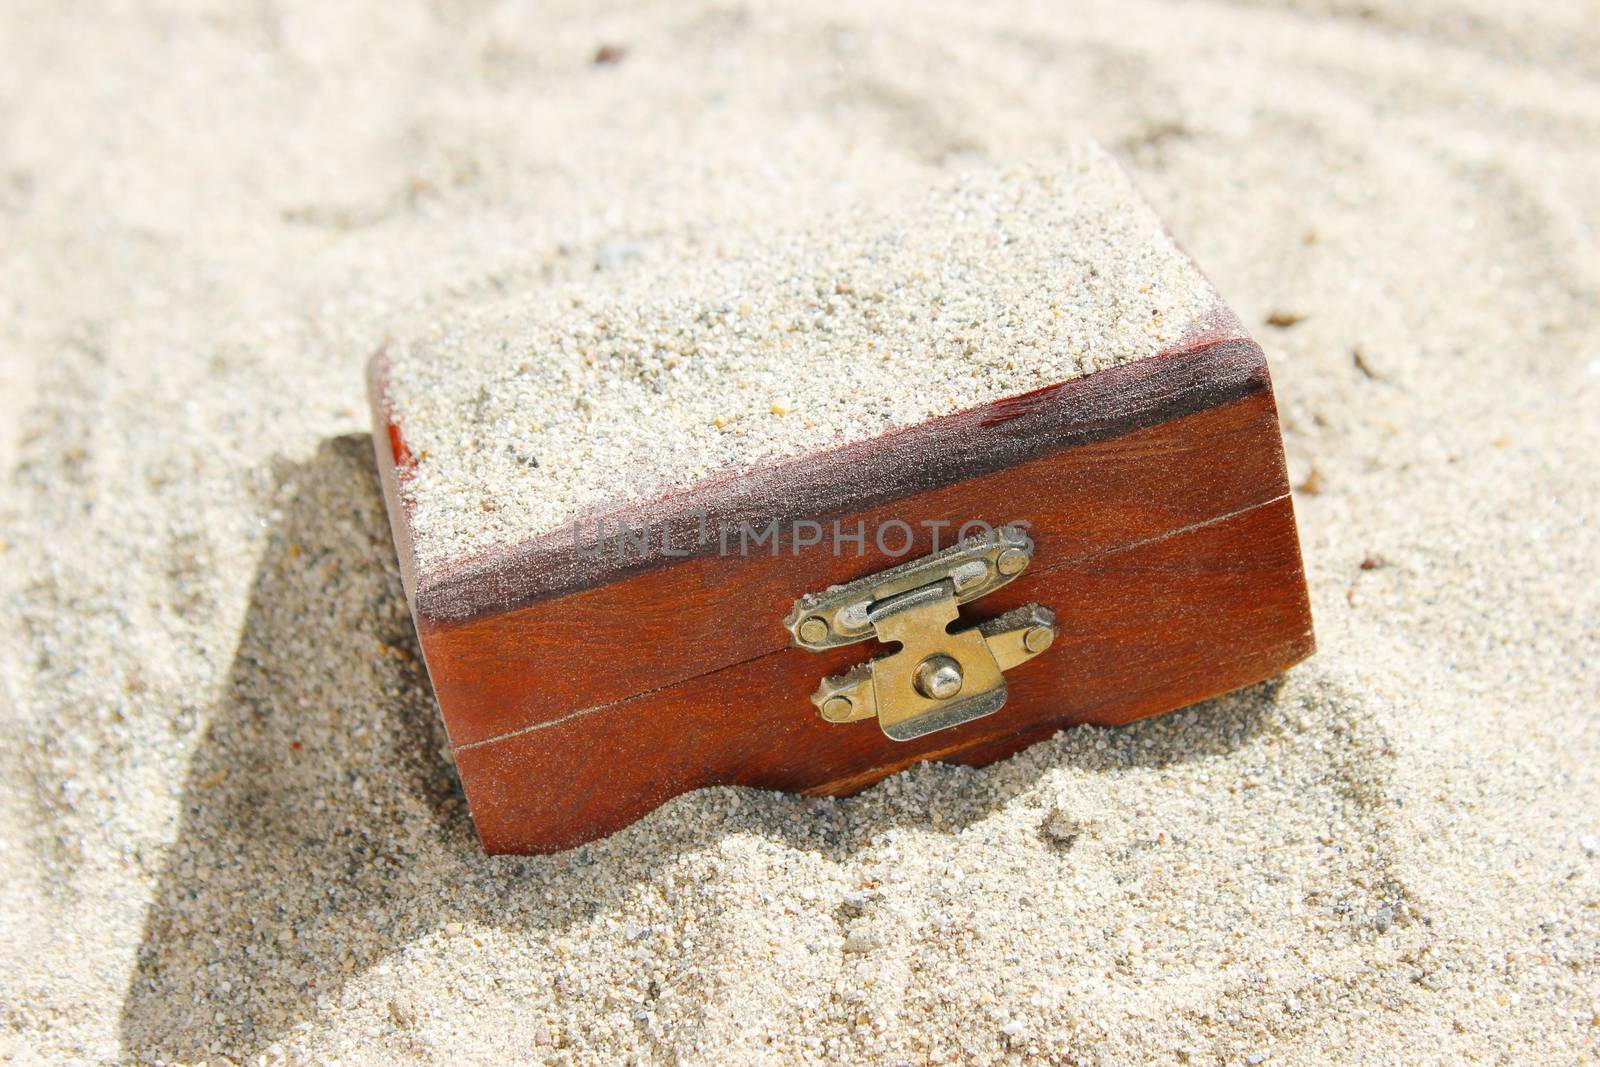 Treasure Chest Buried in Sand by RichieThakur